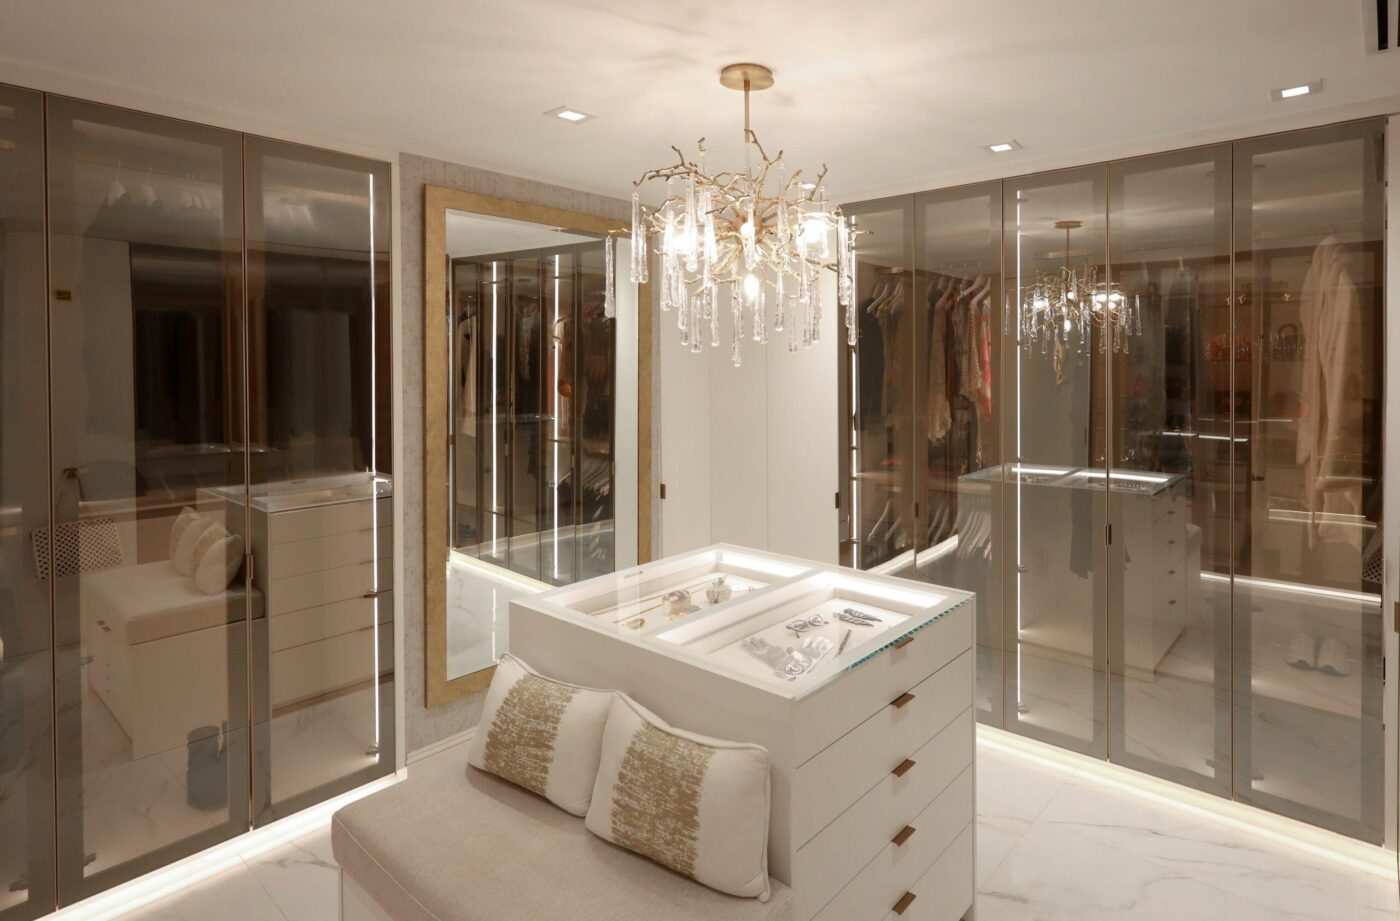 Sleek and streamlined, this gorgeous walk-in closet accented by LED strip lighting has the perfect balance of hanging, shelving and drawer space. Located in Miami Beach this client requested a modern take on the Miami Closet. Adding bronze reflective glass doors to the upgraded white finish with matte gold accessories really brought this room to life. The island with a glass top countertop for jewelry display was just the cherry on top. Photo Creds: Giang Haus